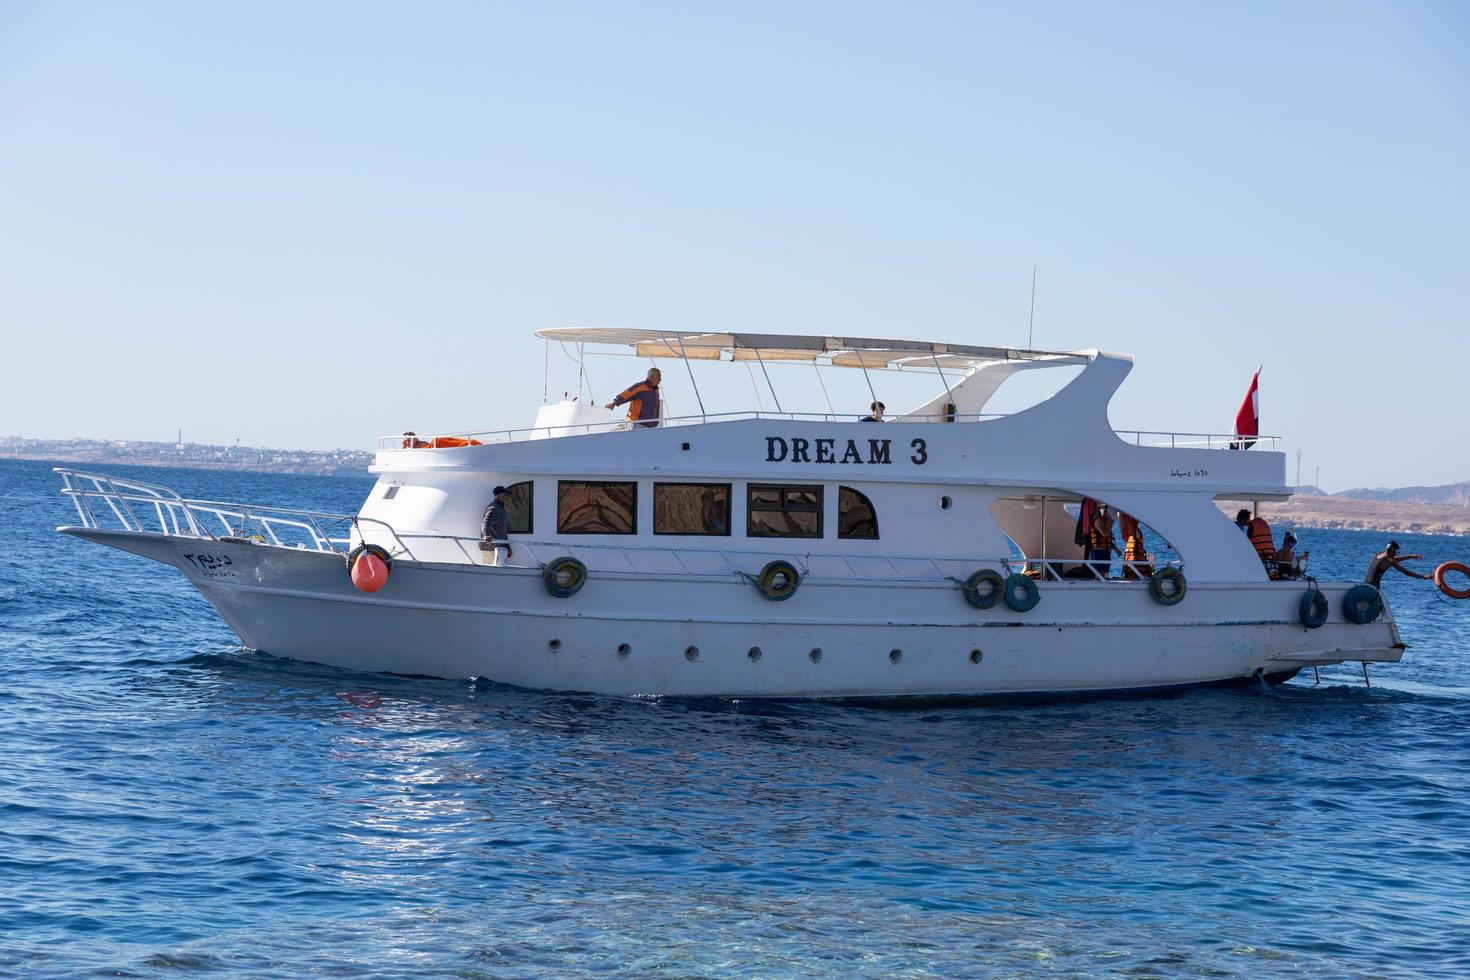 Sharm El Sheikh, Egypt - January 21, 2021 - Pleasure tourist boat with passengers used for diving in the red sea photo